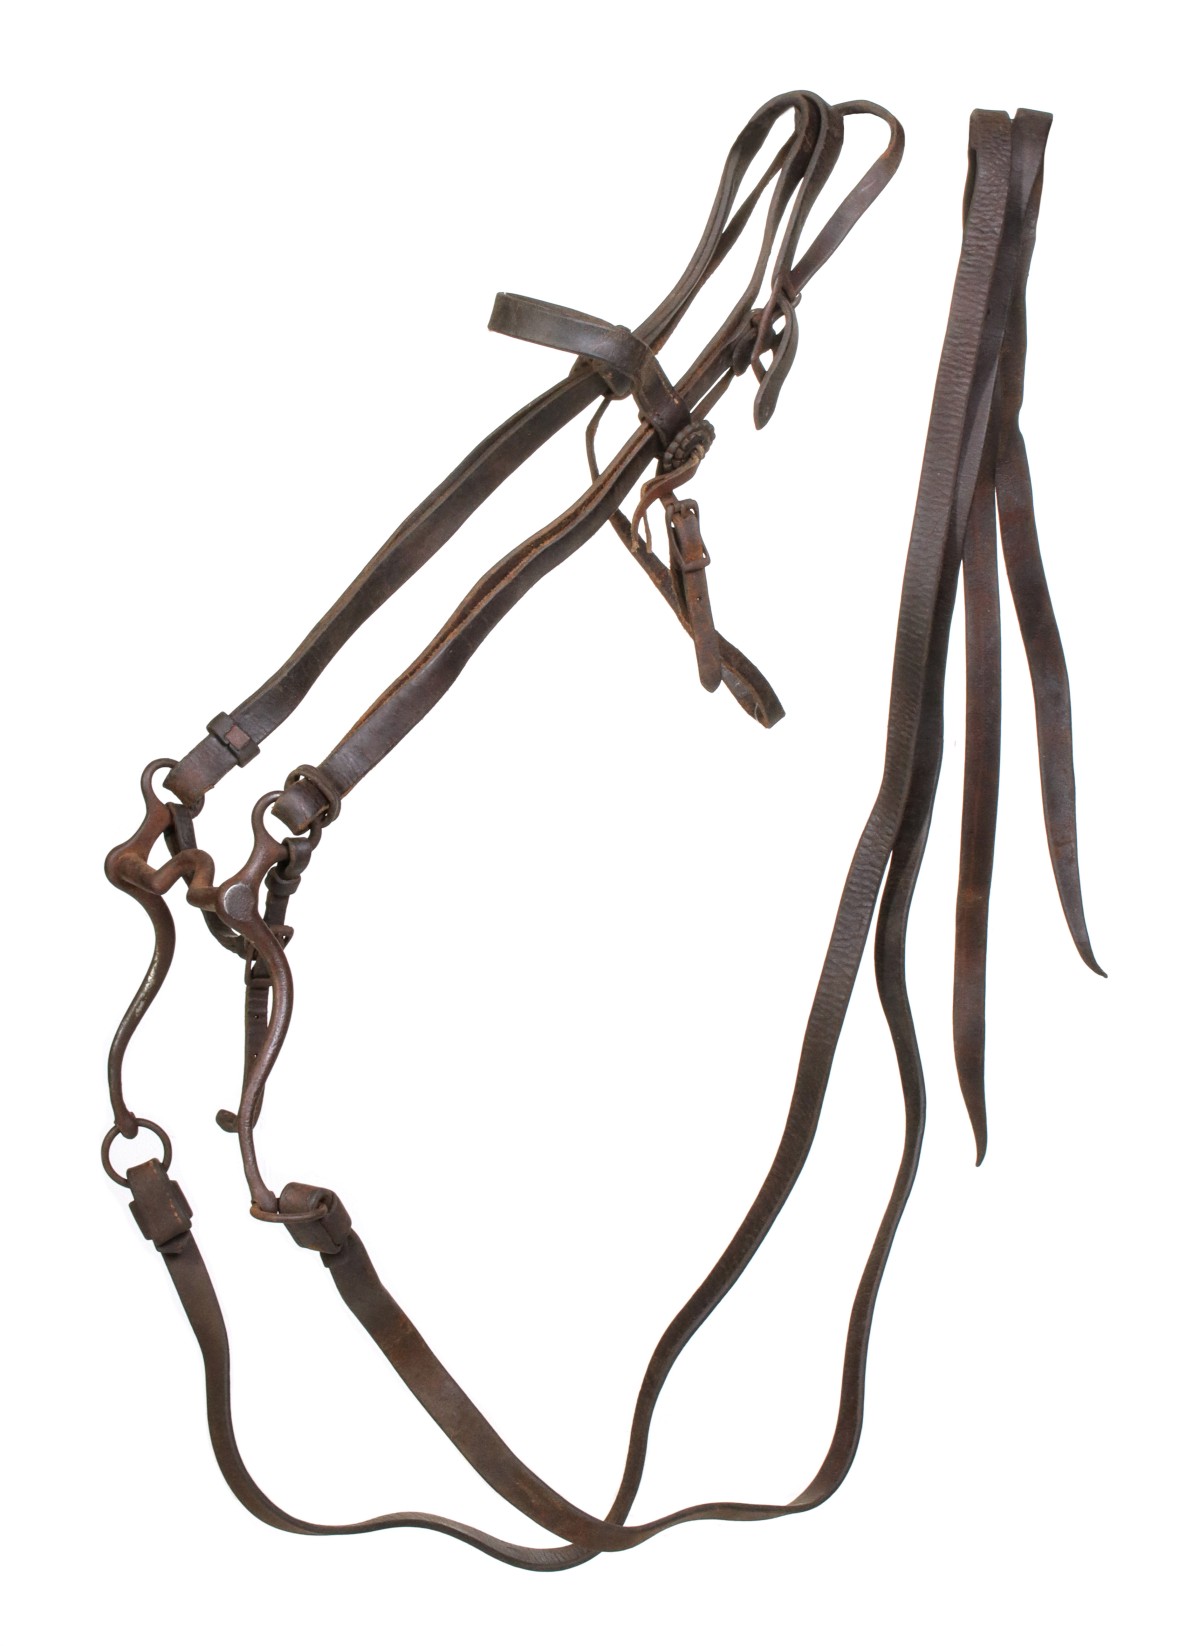 LEATHER BRIDLE WITH REINS STAMPED C.P. SHIPLEY